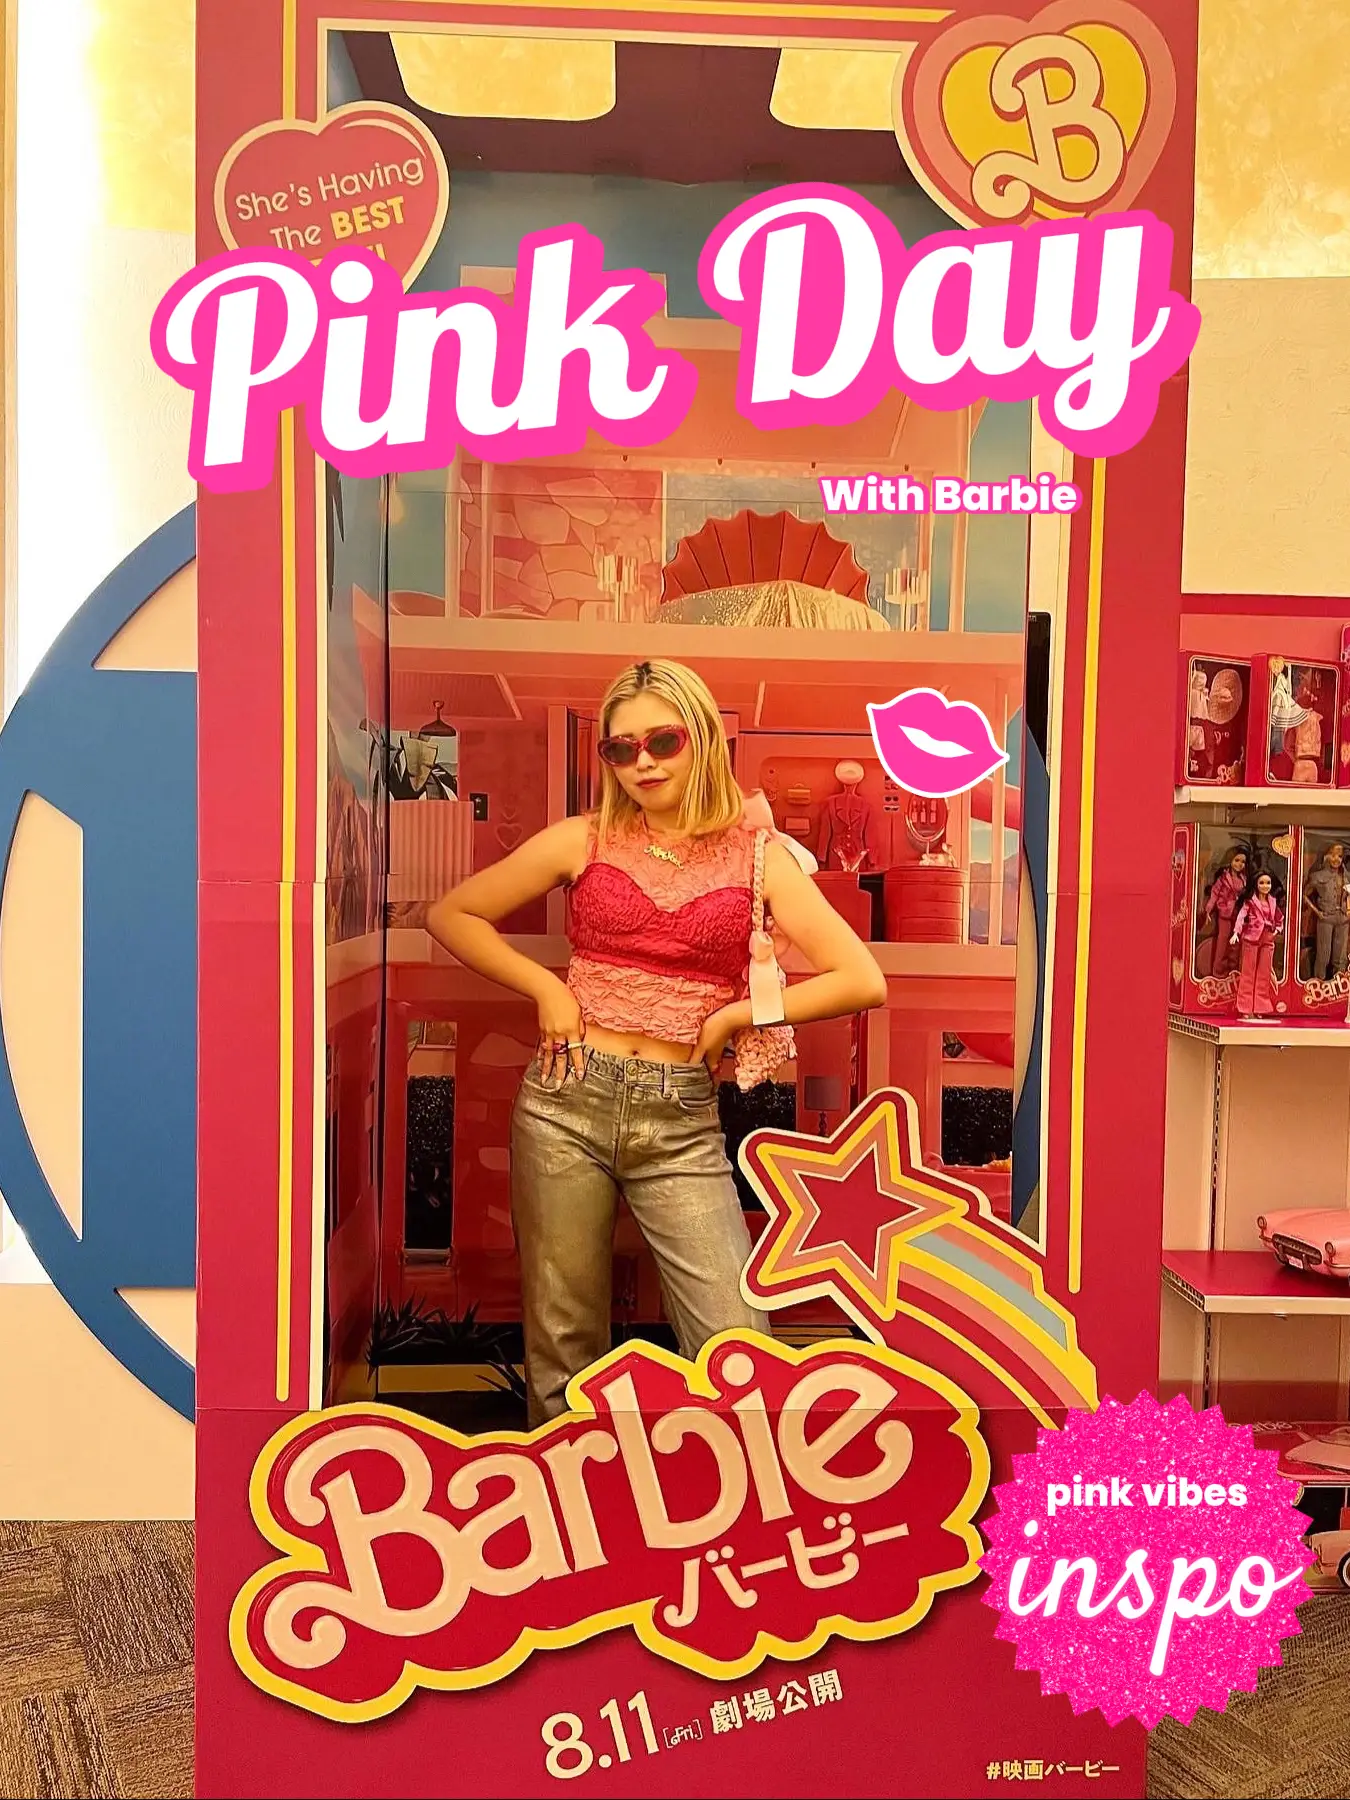 Pink outfit】Barbie The Movie 試写会💗 | Rihoが投稿したフォト